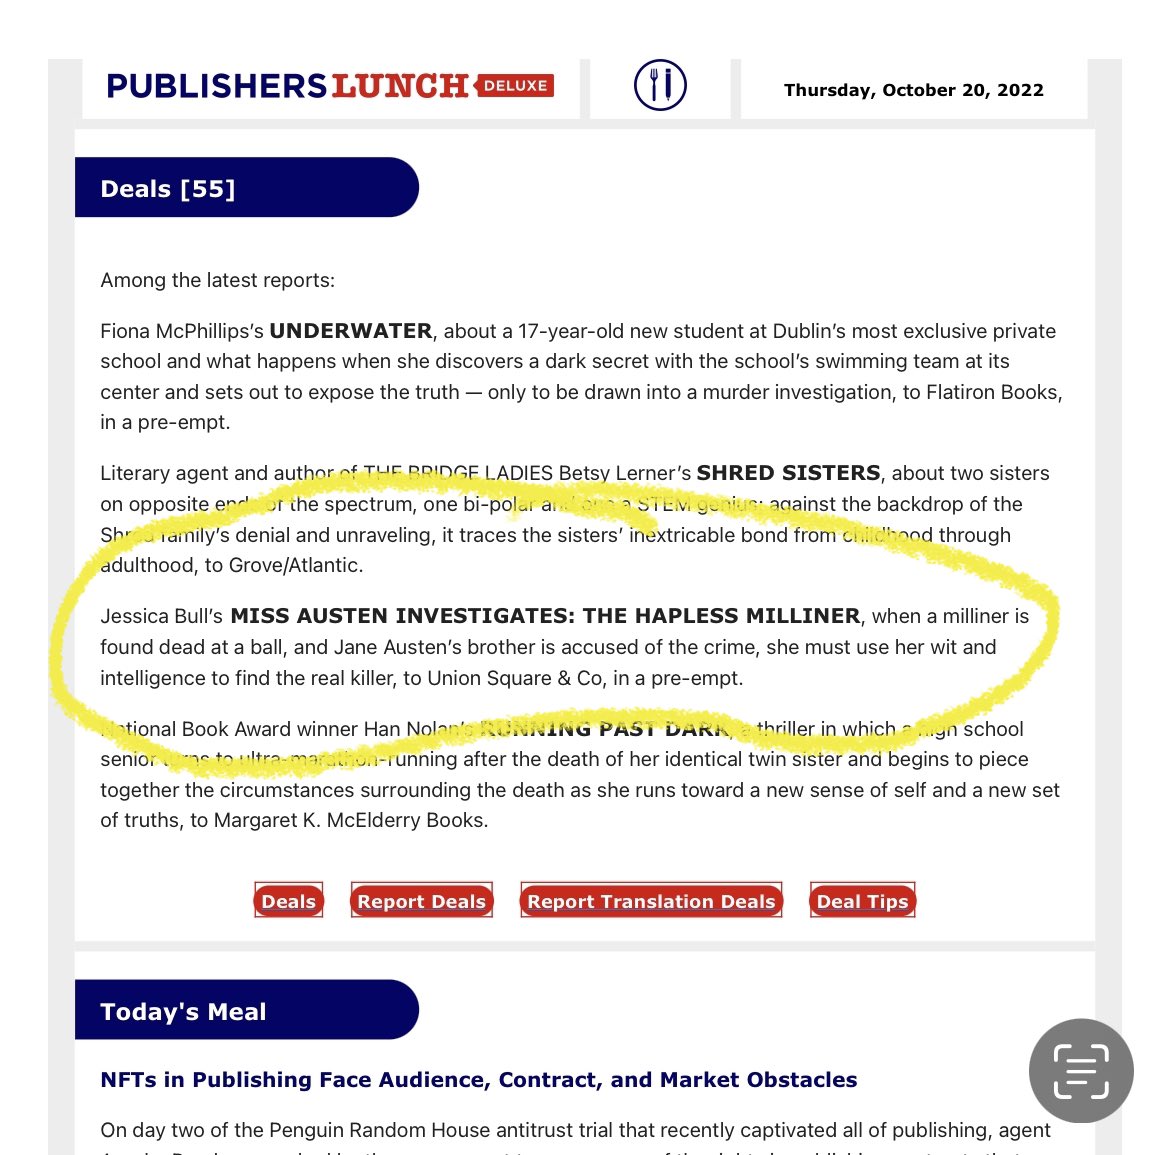 I admit, I dreamt of one day seeing my own rectangle in Publishers Marketplace, but I didn’t even know you could headline!! Thanks so much to @UnionSqandCo Jenny Bent at #TheBentAgency and super⭐️ @mushenska #MissAustenInvestigates